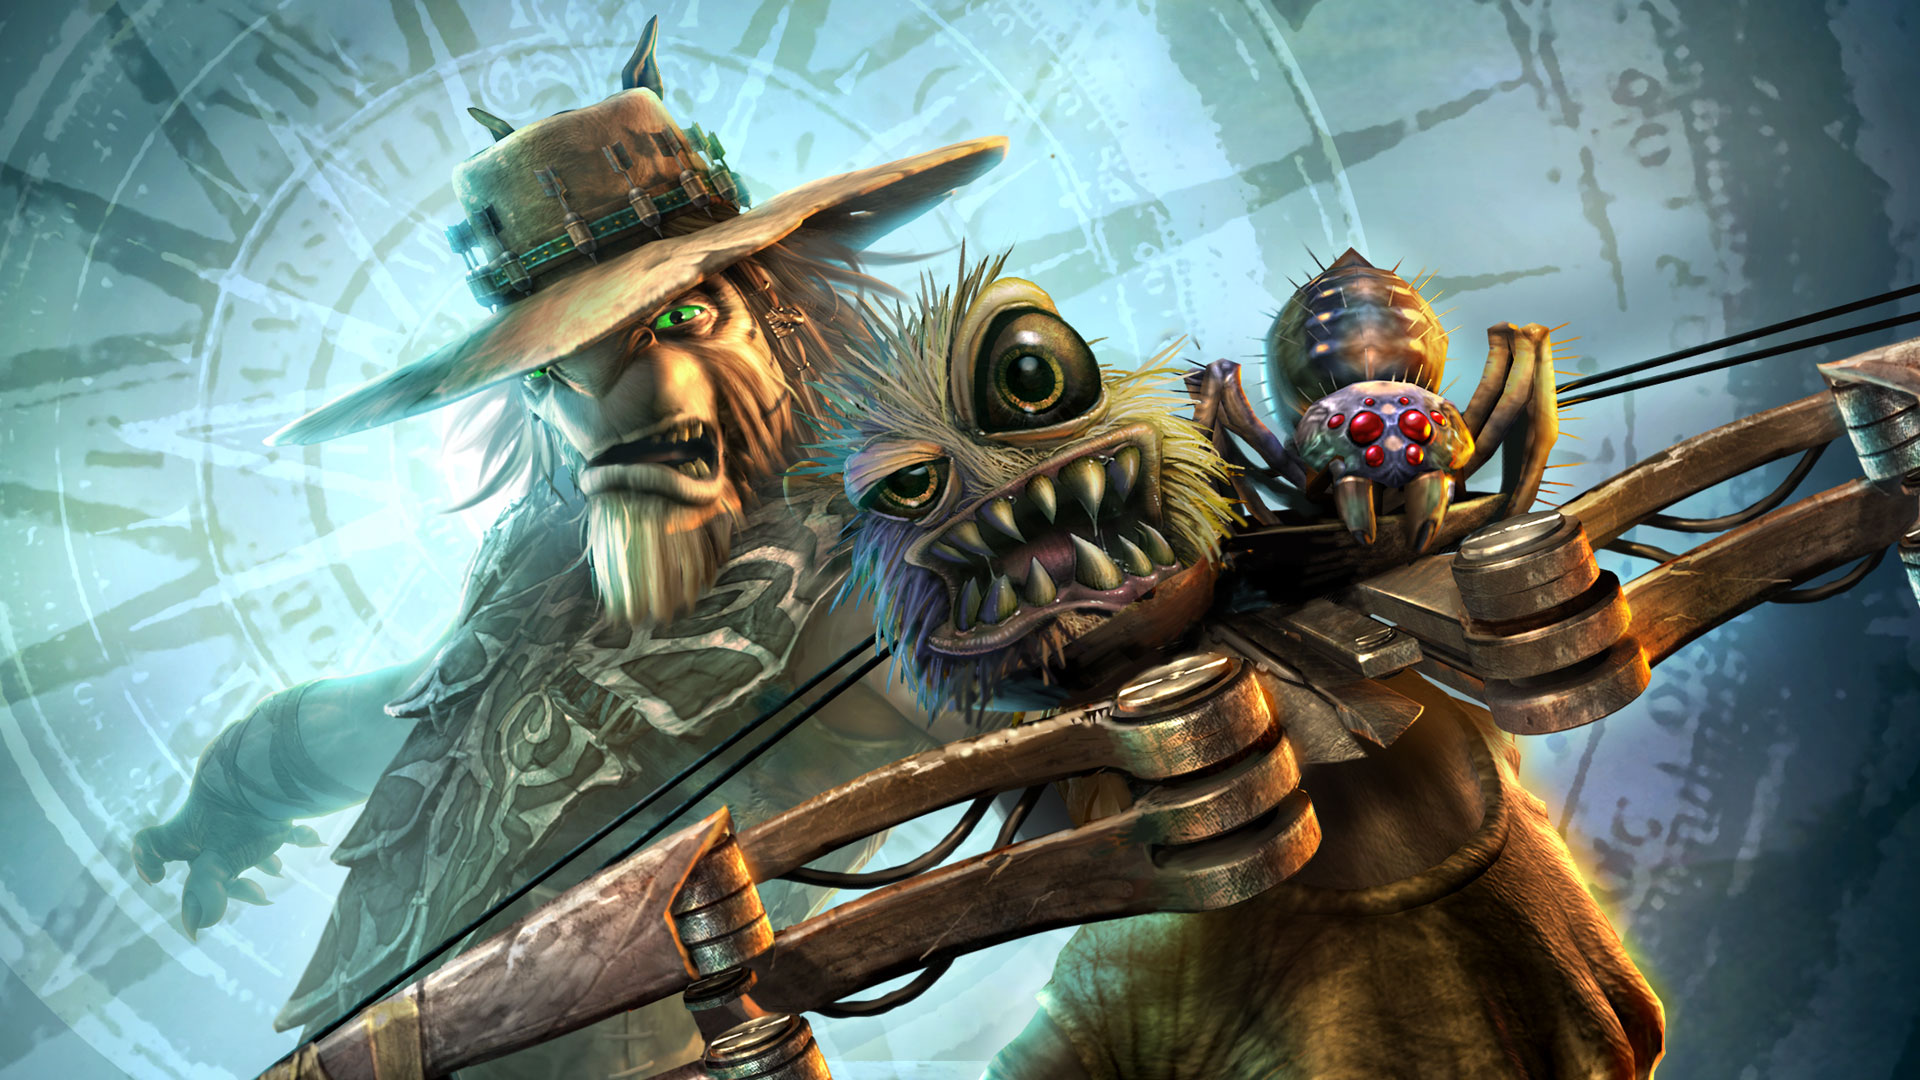 Oddworld: Stranger's Wrath HD is coming to Xbox One